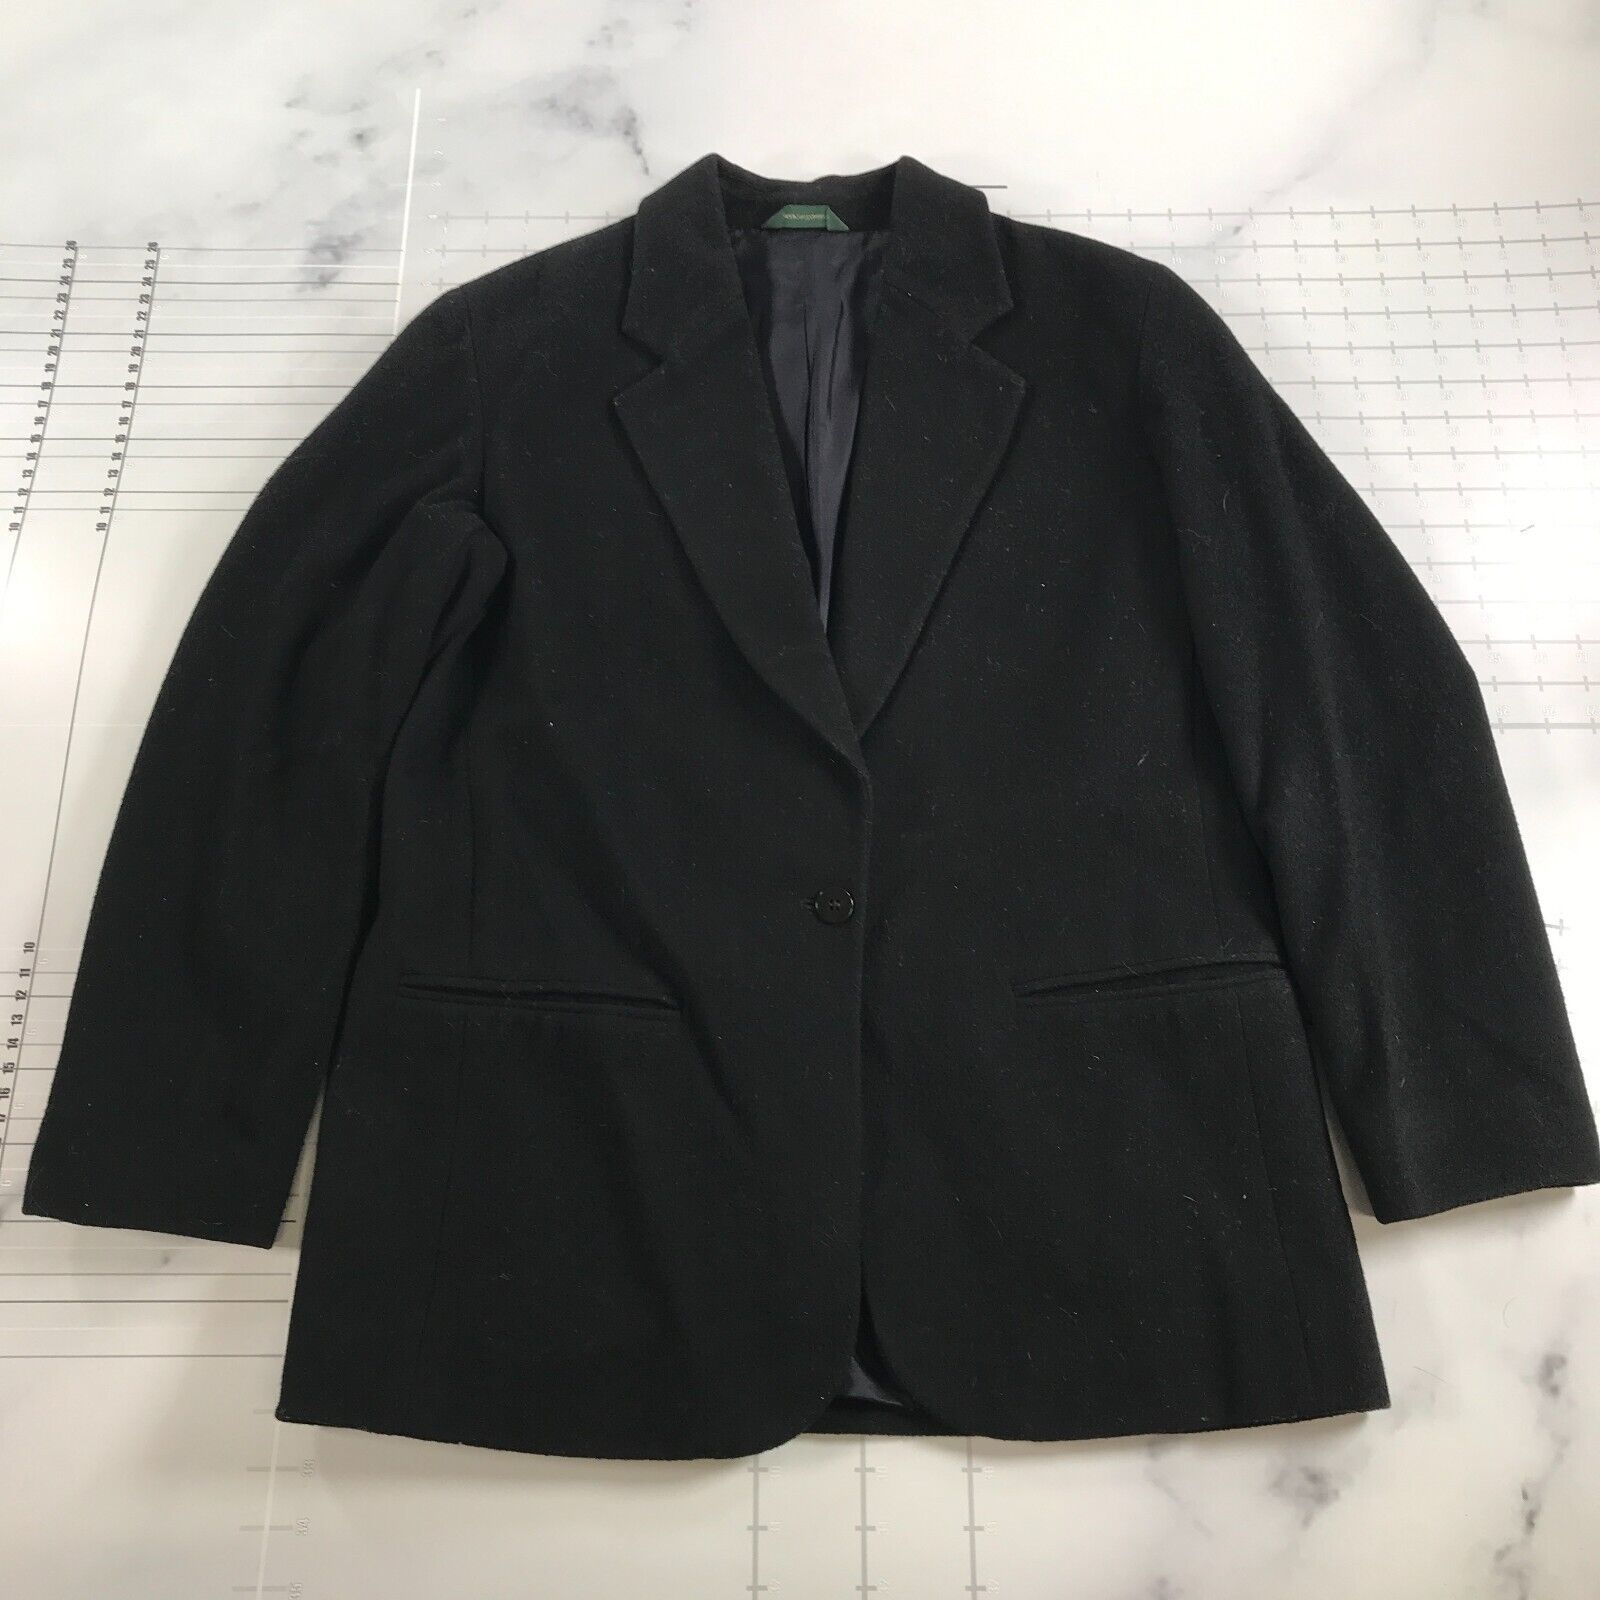 Primary image for Vintage J Crew Blazer Womens 4 Black Soft Cashmere Wool Two Button Large Lapels